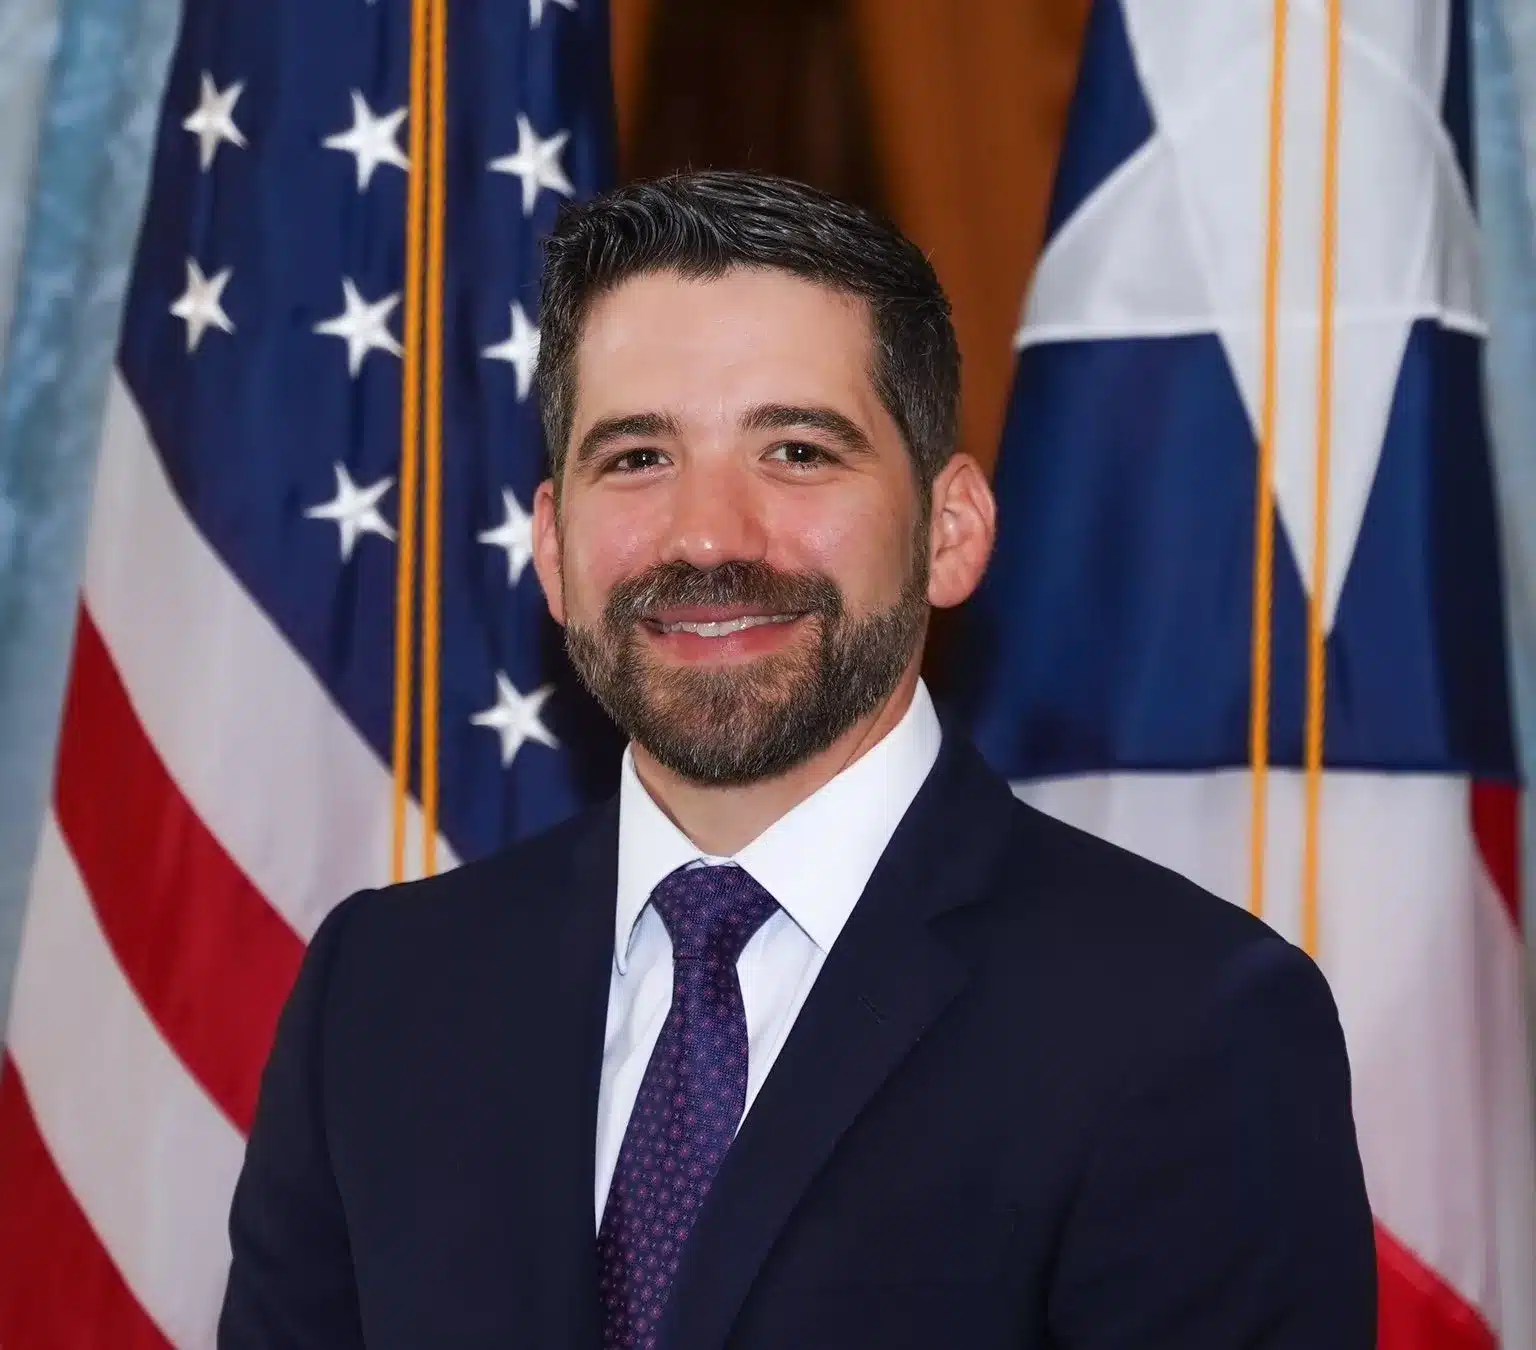 Governor Pedro Pierluisi announces appointment of new PRFAA Executive Director